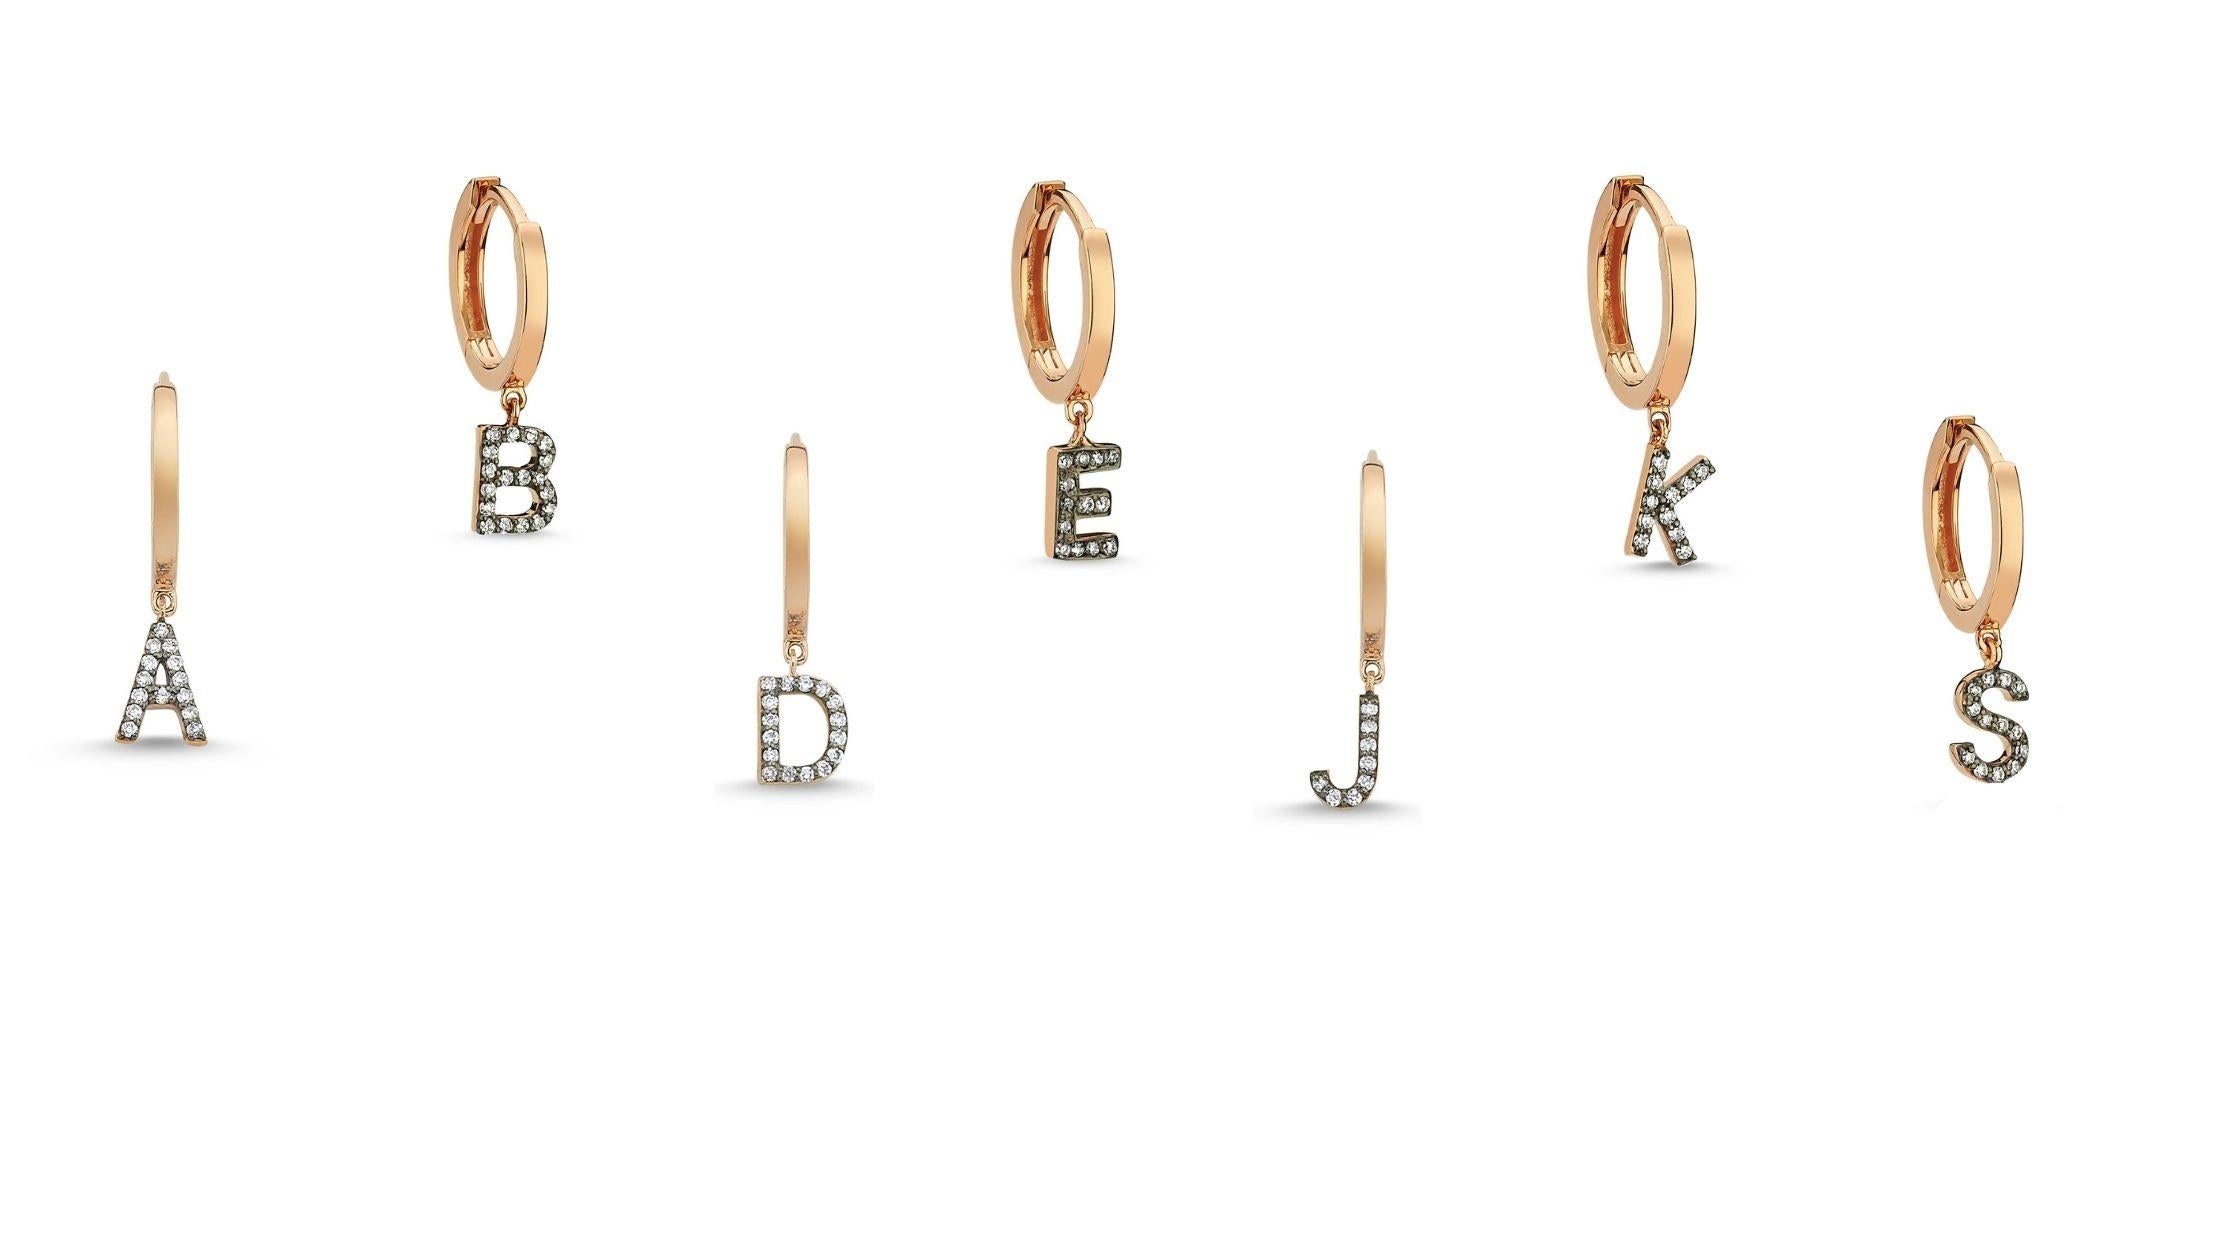 Letter Ş (single) 14k rose gold earring with white diamond by Selda Jewellery

Additional Information:-
Collection: Letter Collection
14k Rose gold
0.04ct White diamond
Letter height 1cm